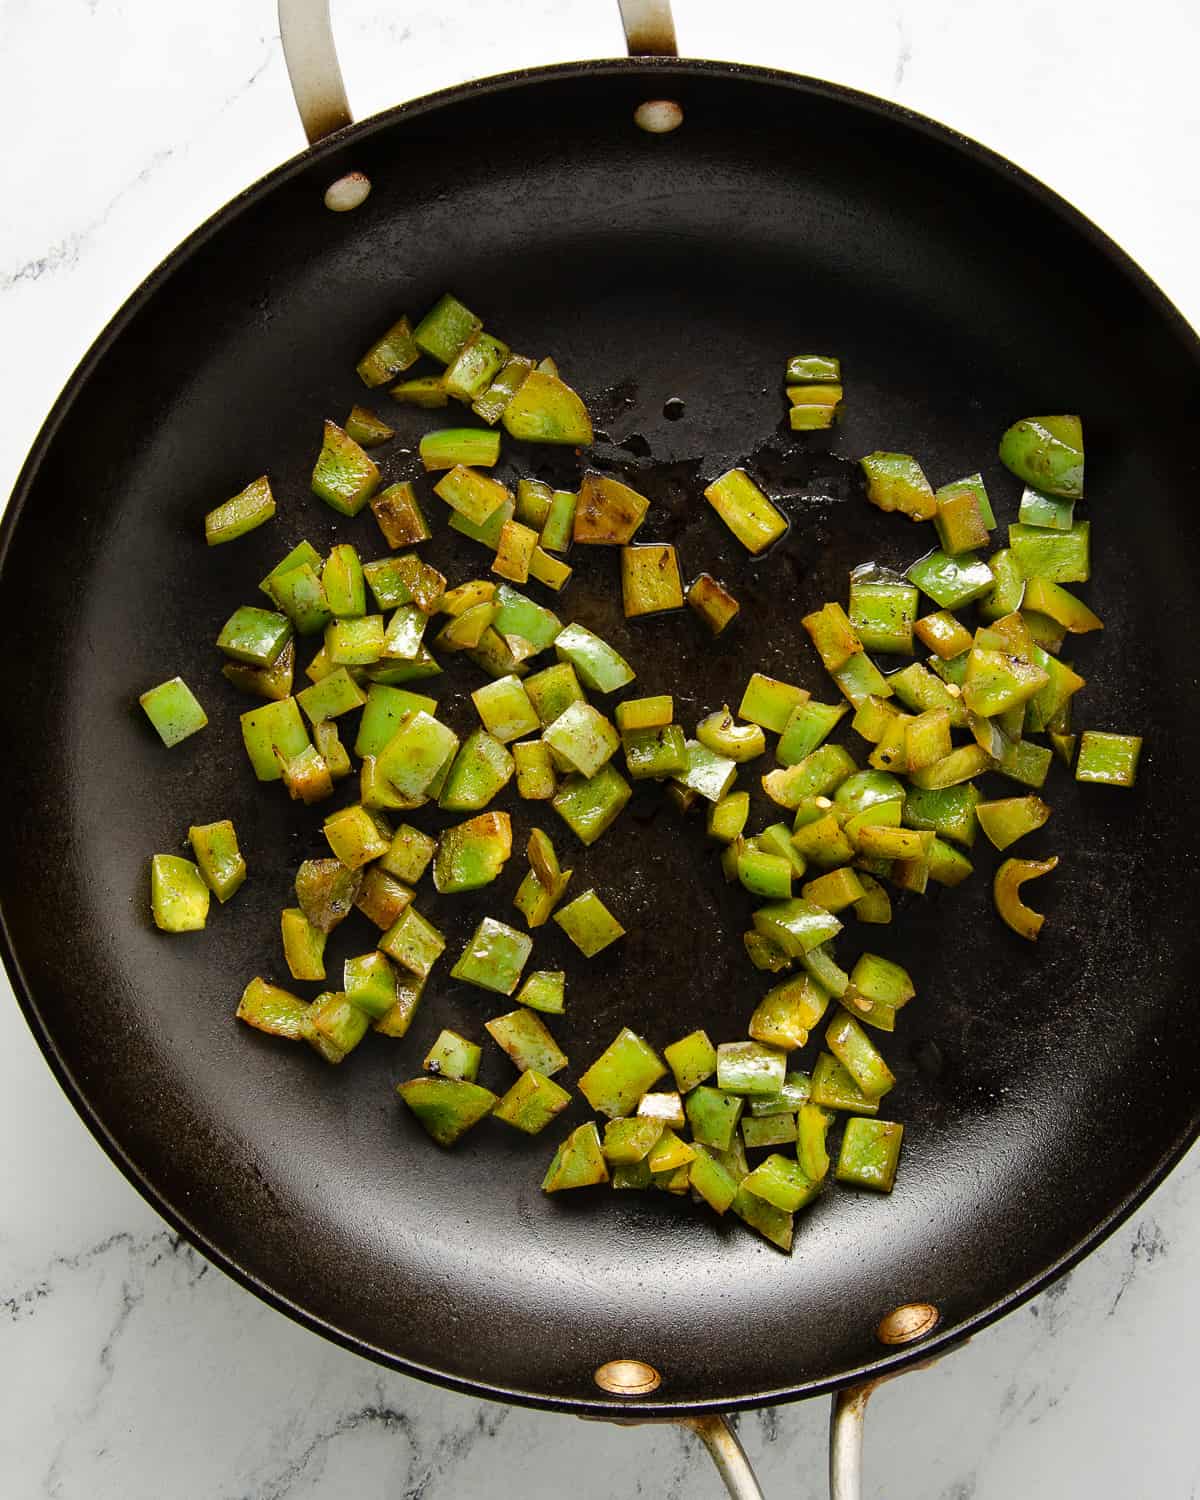 Small diced green bell pepper cooked in a skillet.